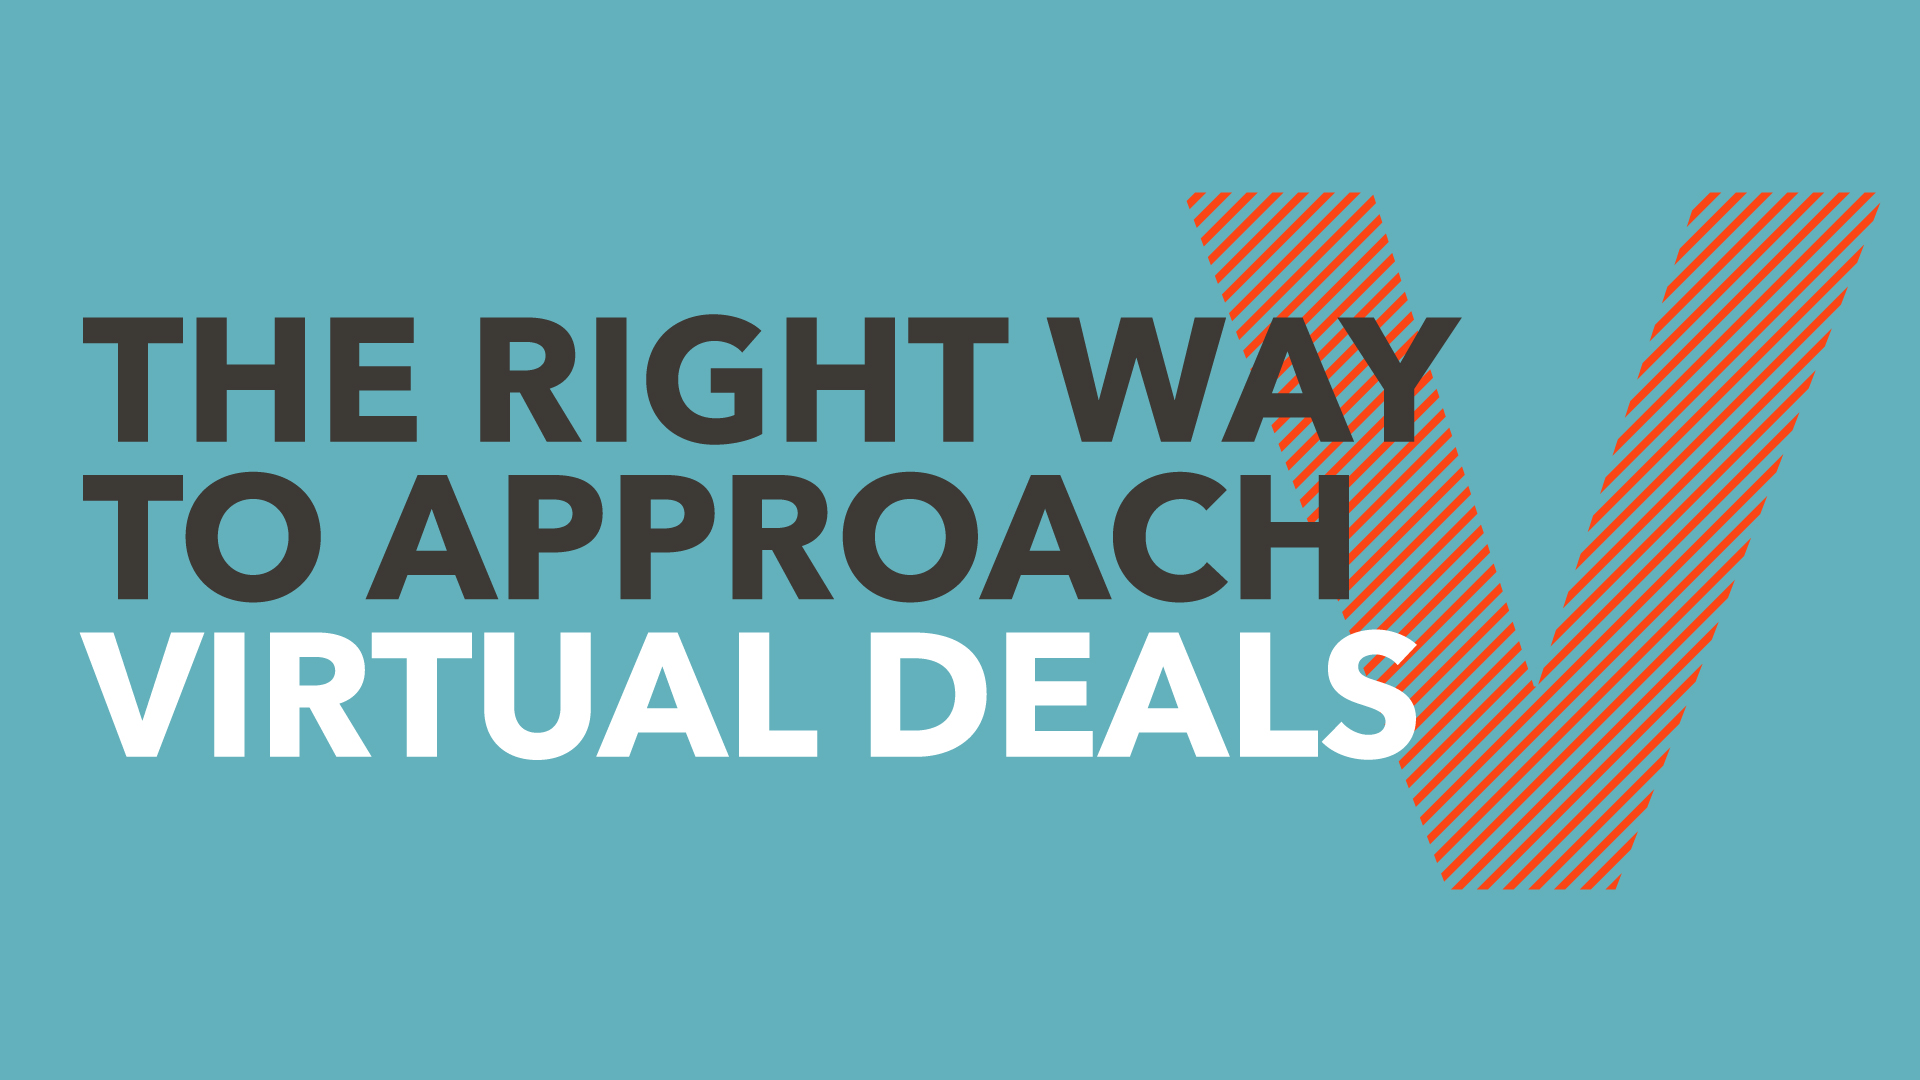 The right way to approach virtual deals